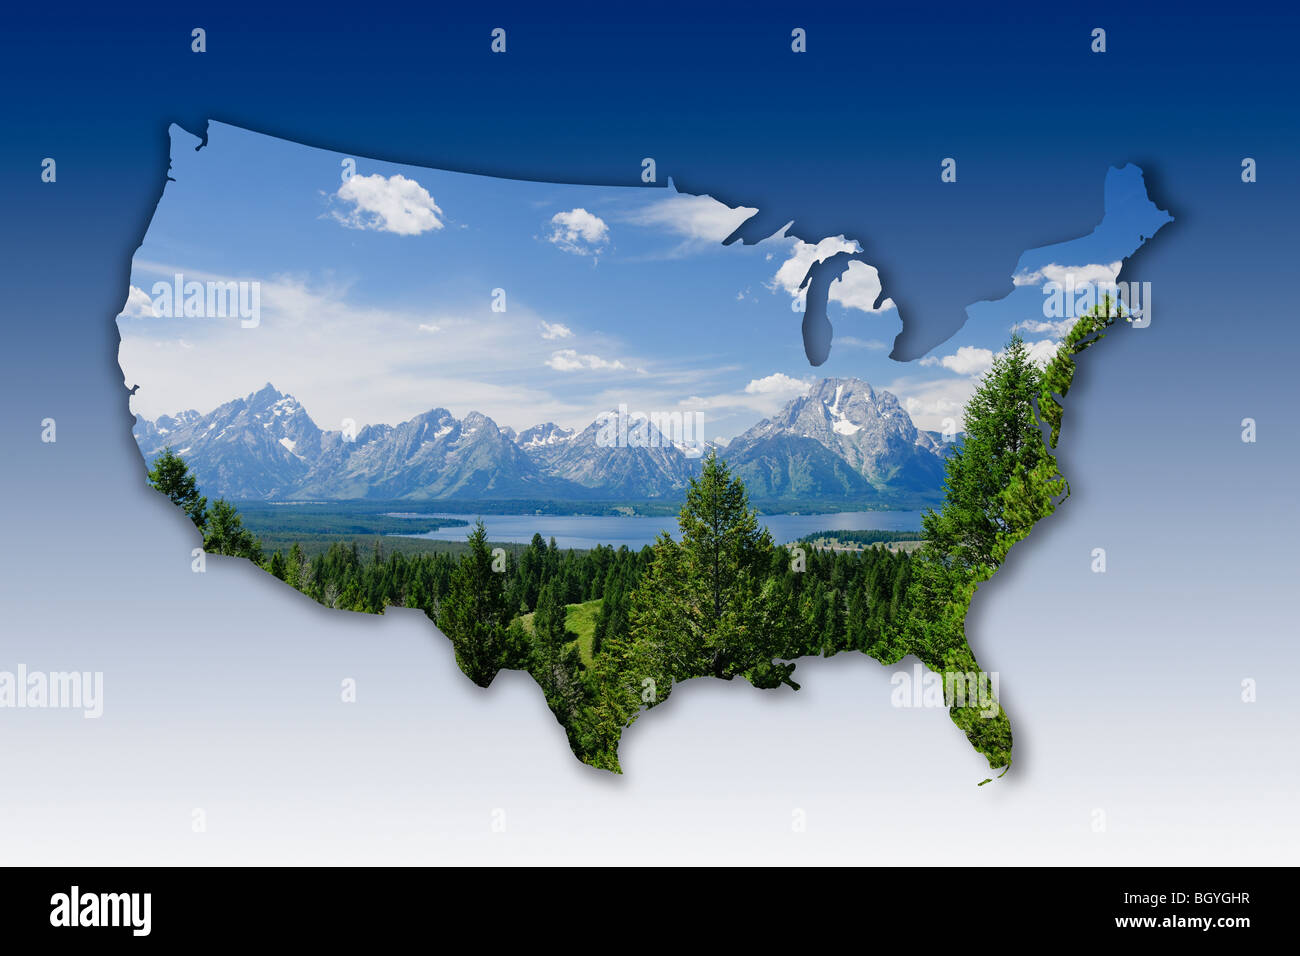 Landscape in shape of the United States Stock Photo